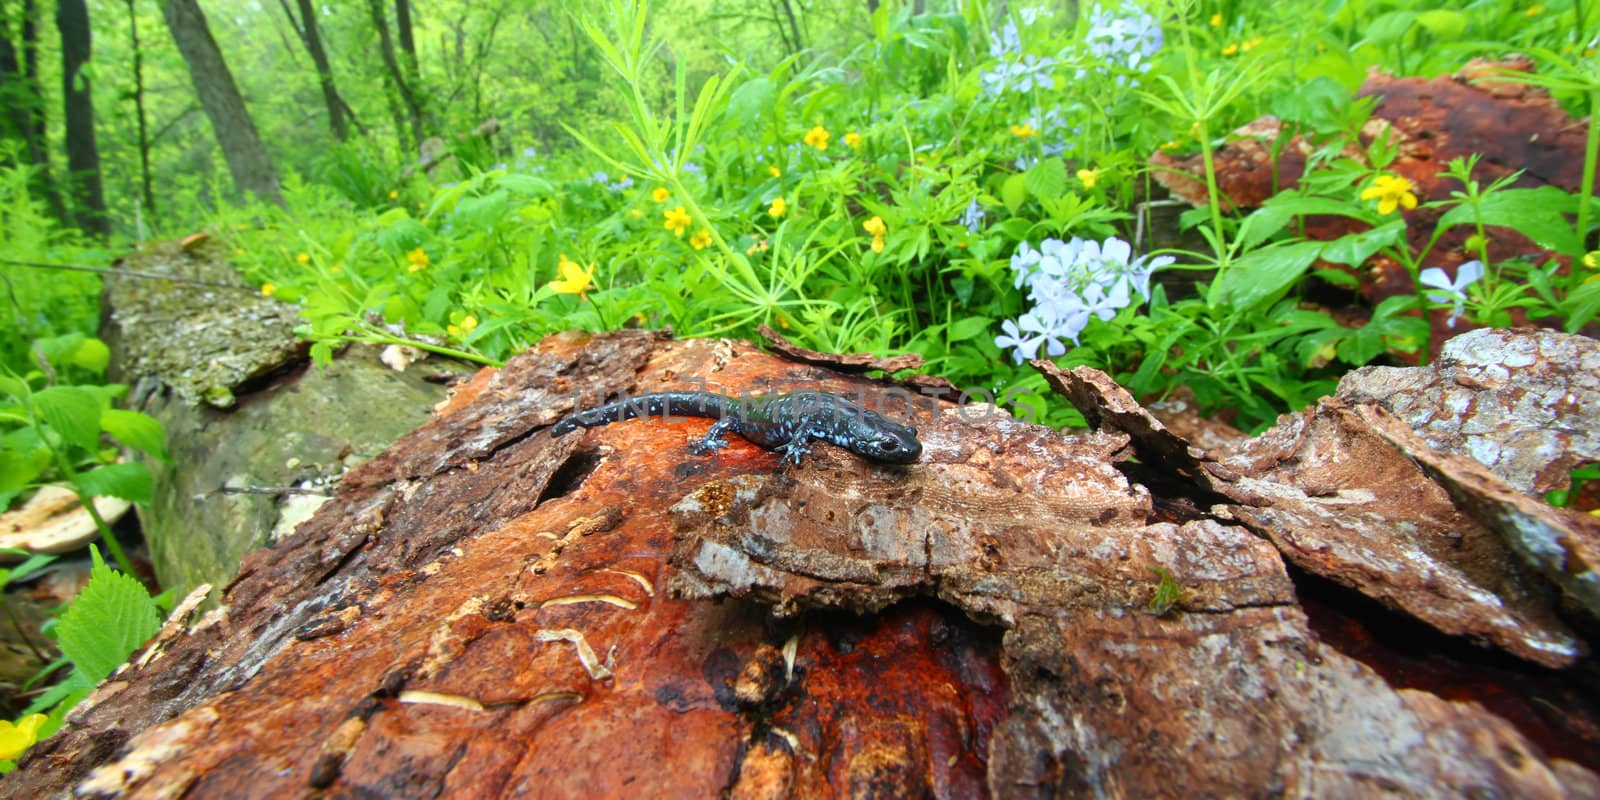 A Blue-spotted Salamander (Ambystoma laterale) sits in a spring woodland in Illinois.